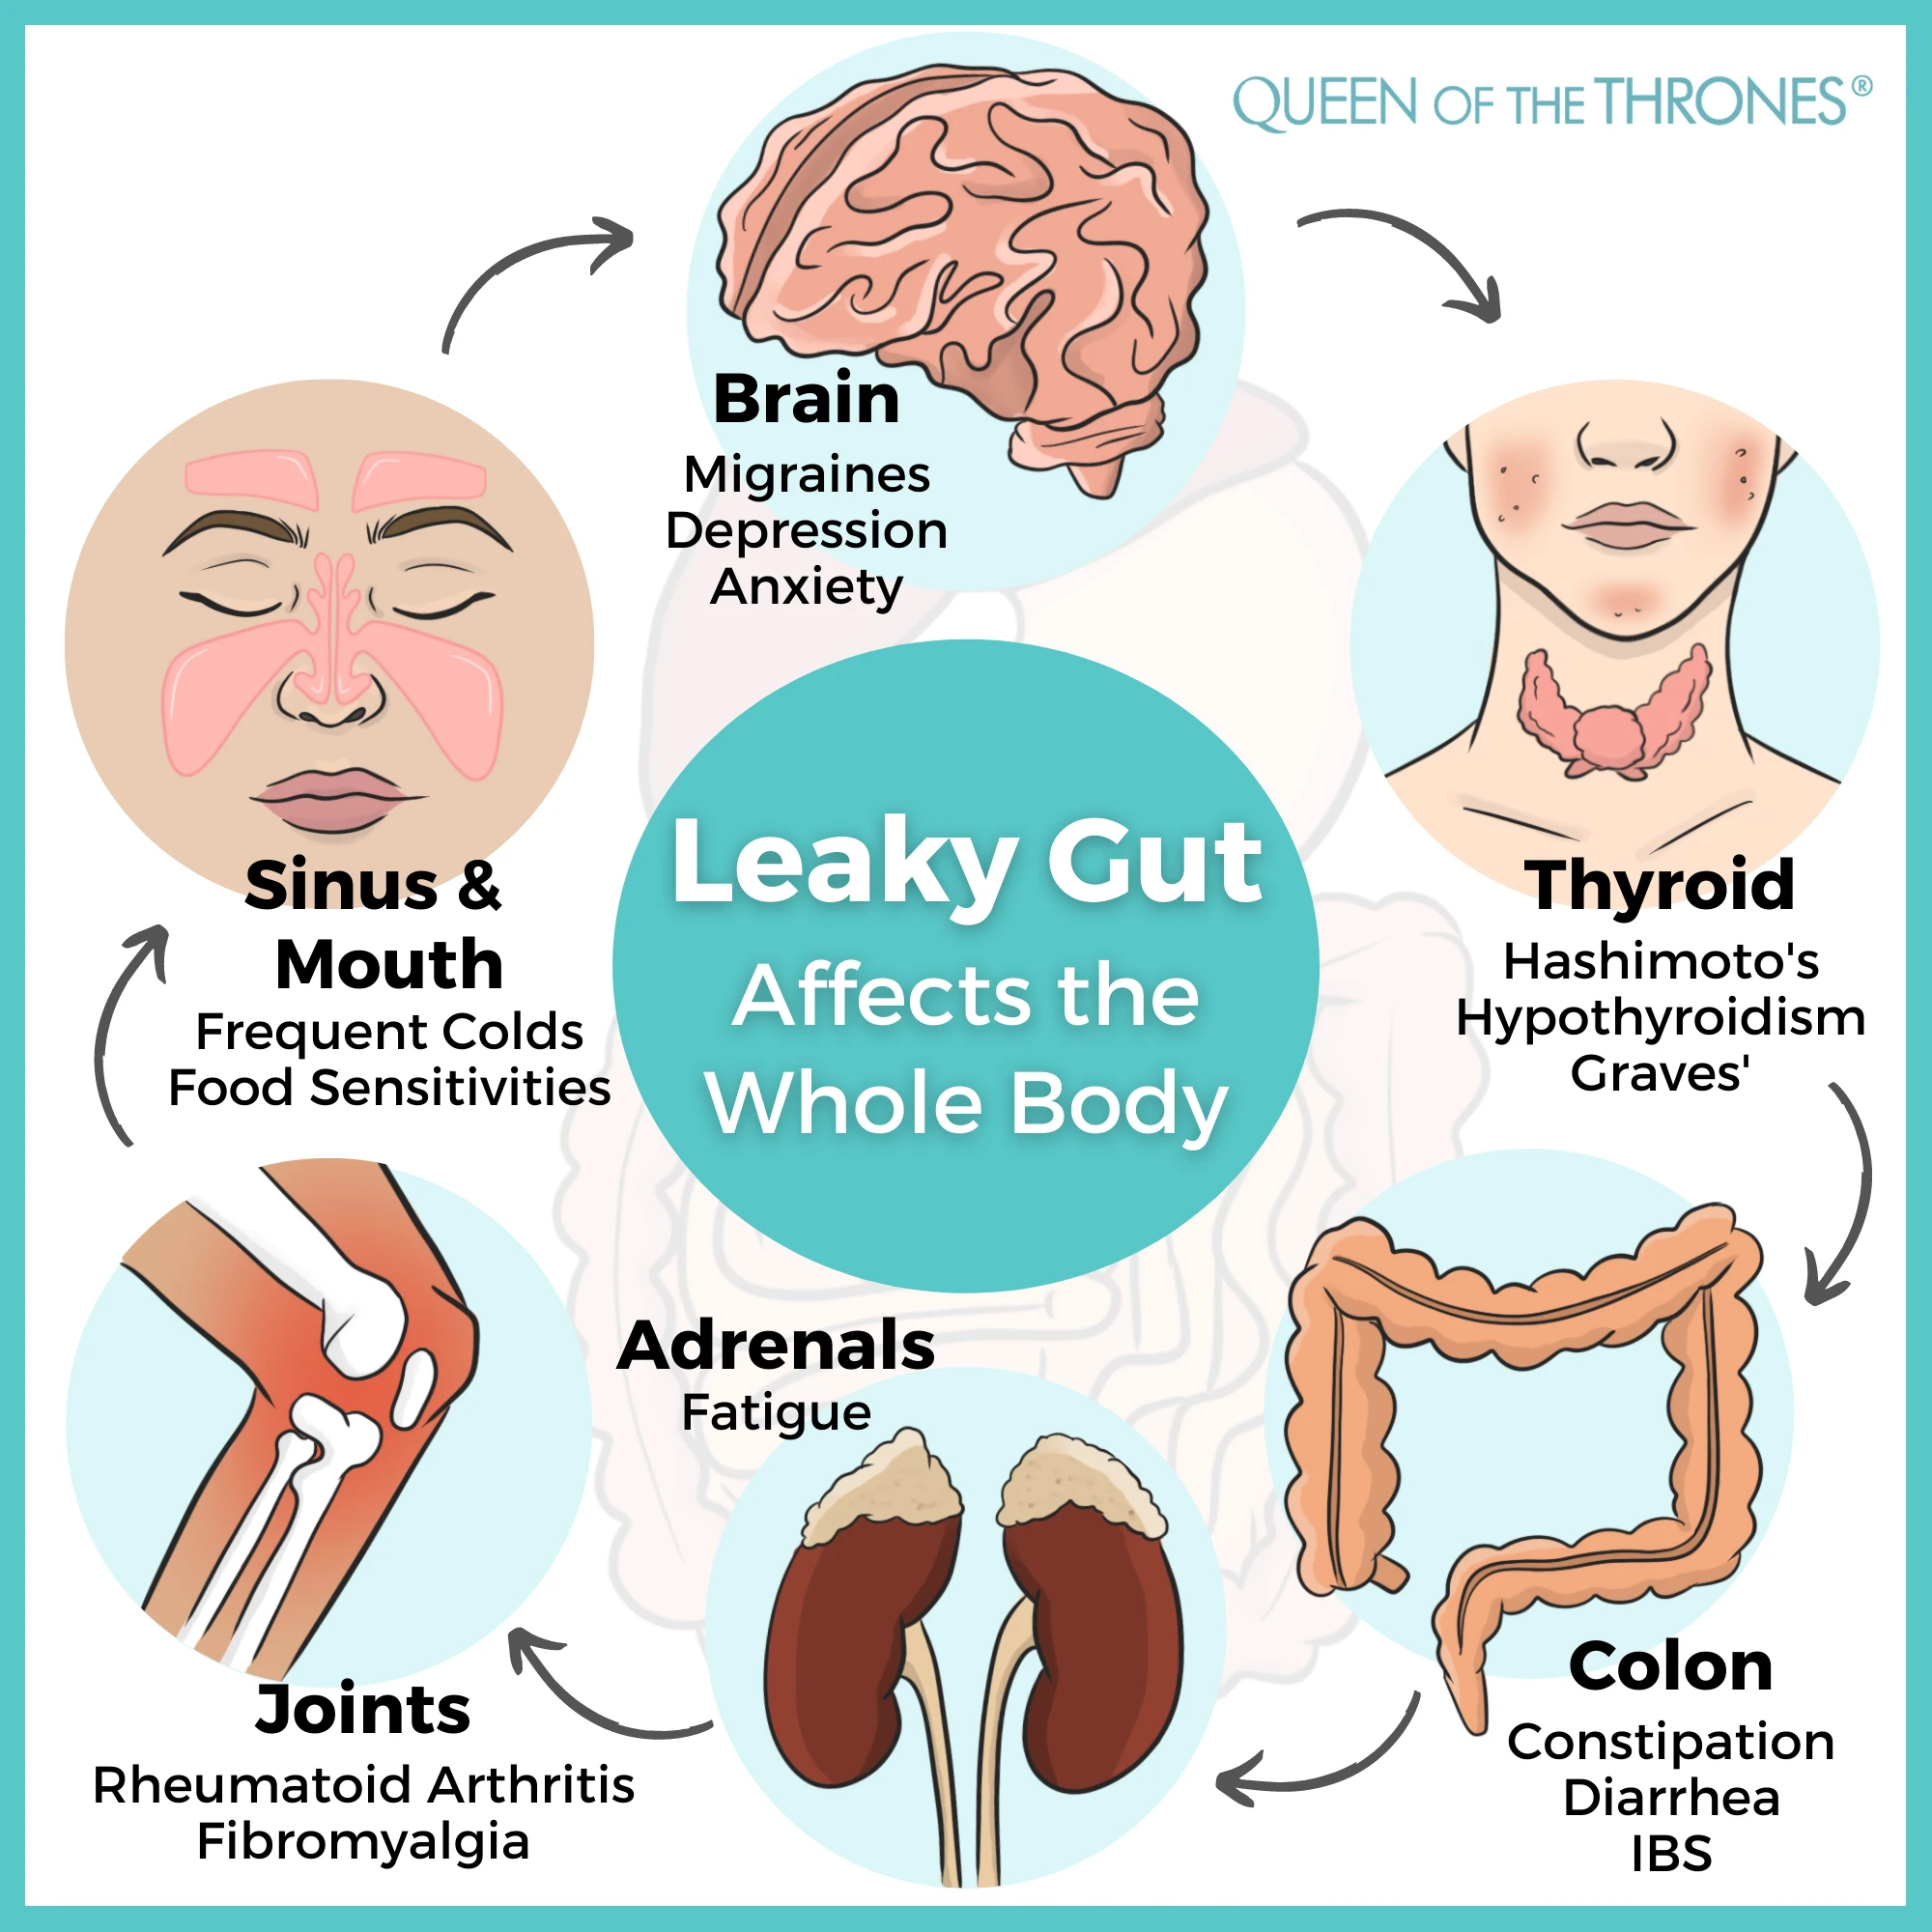 Organs affected by Leaky Gut according to Queen of the Thrones